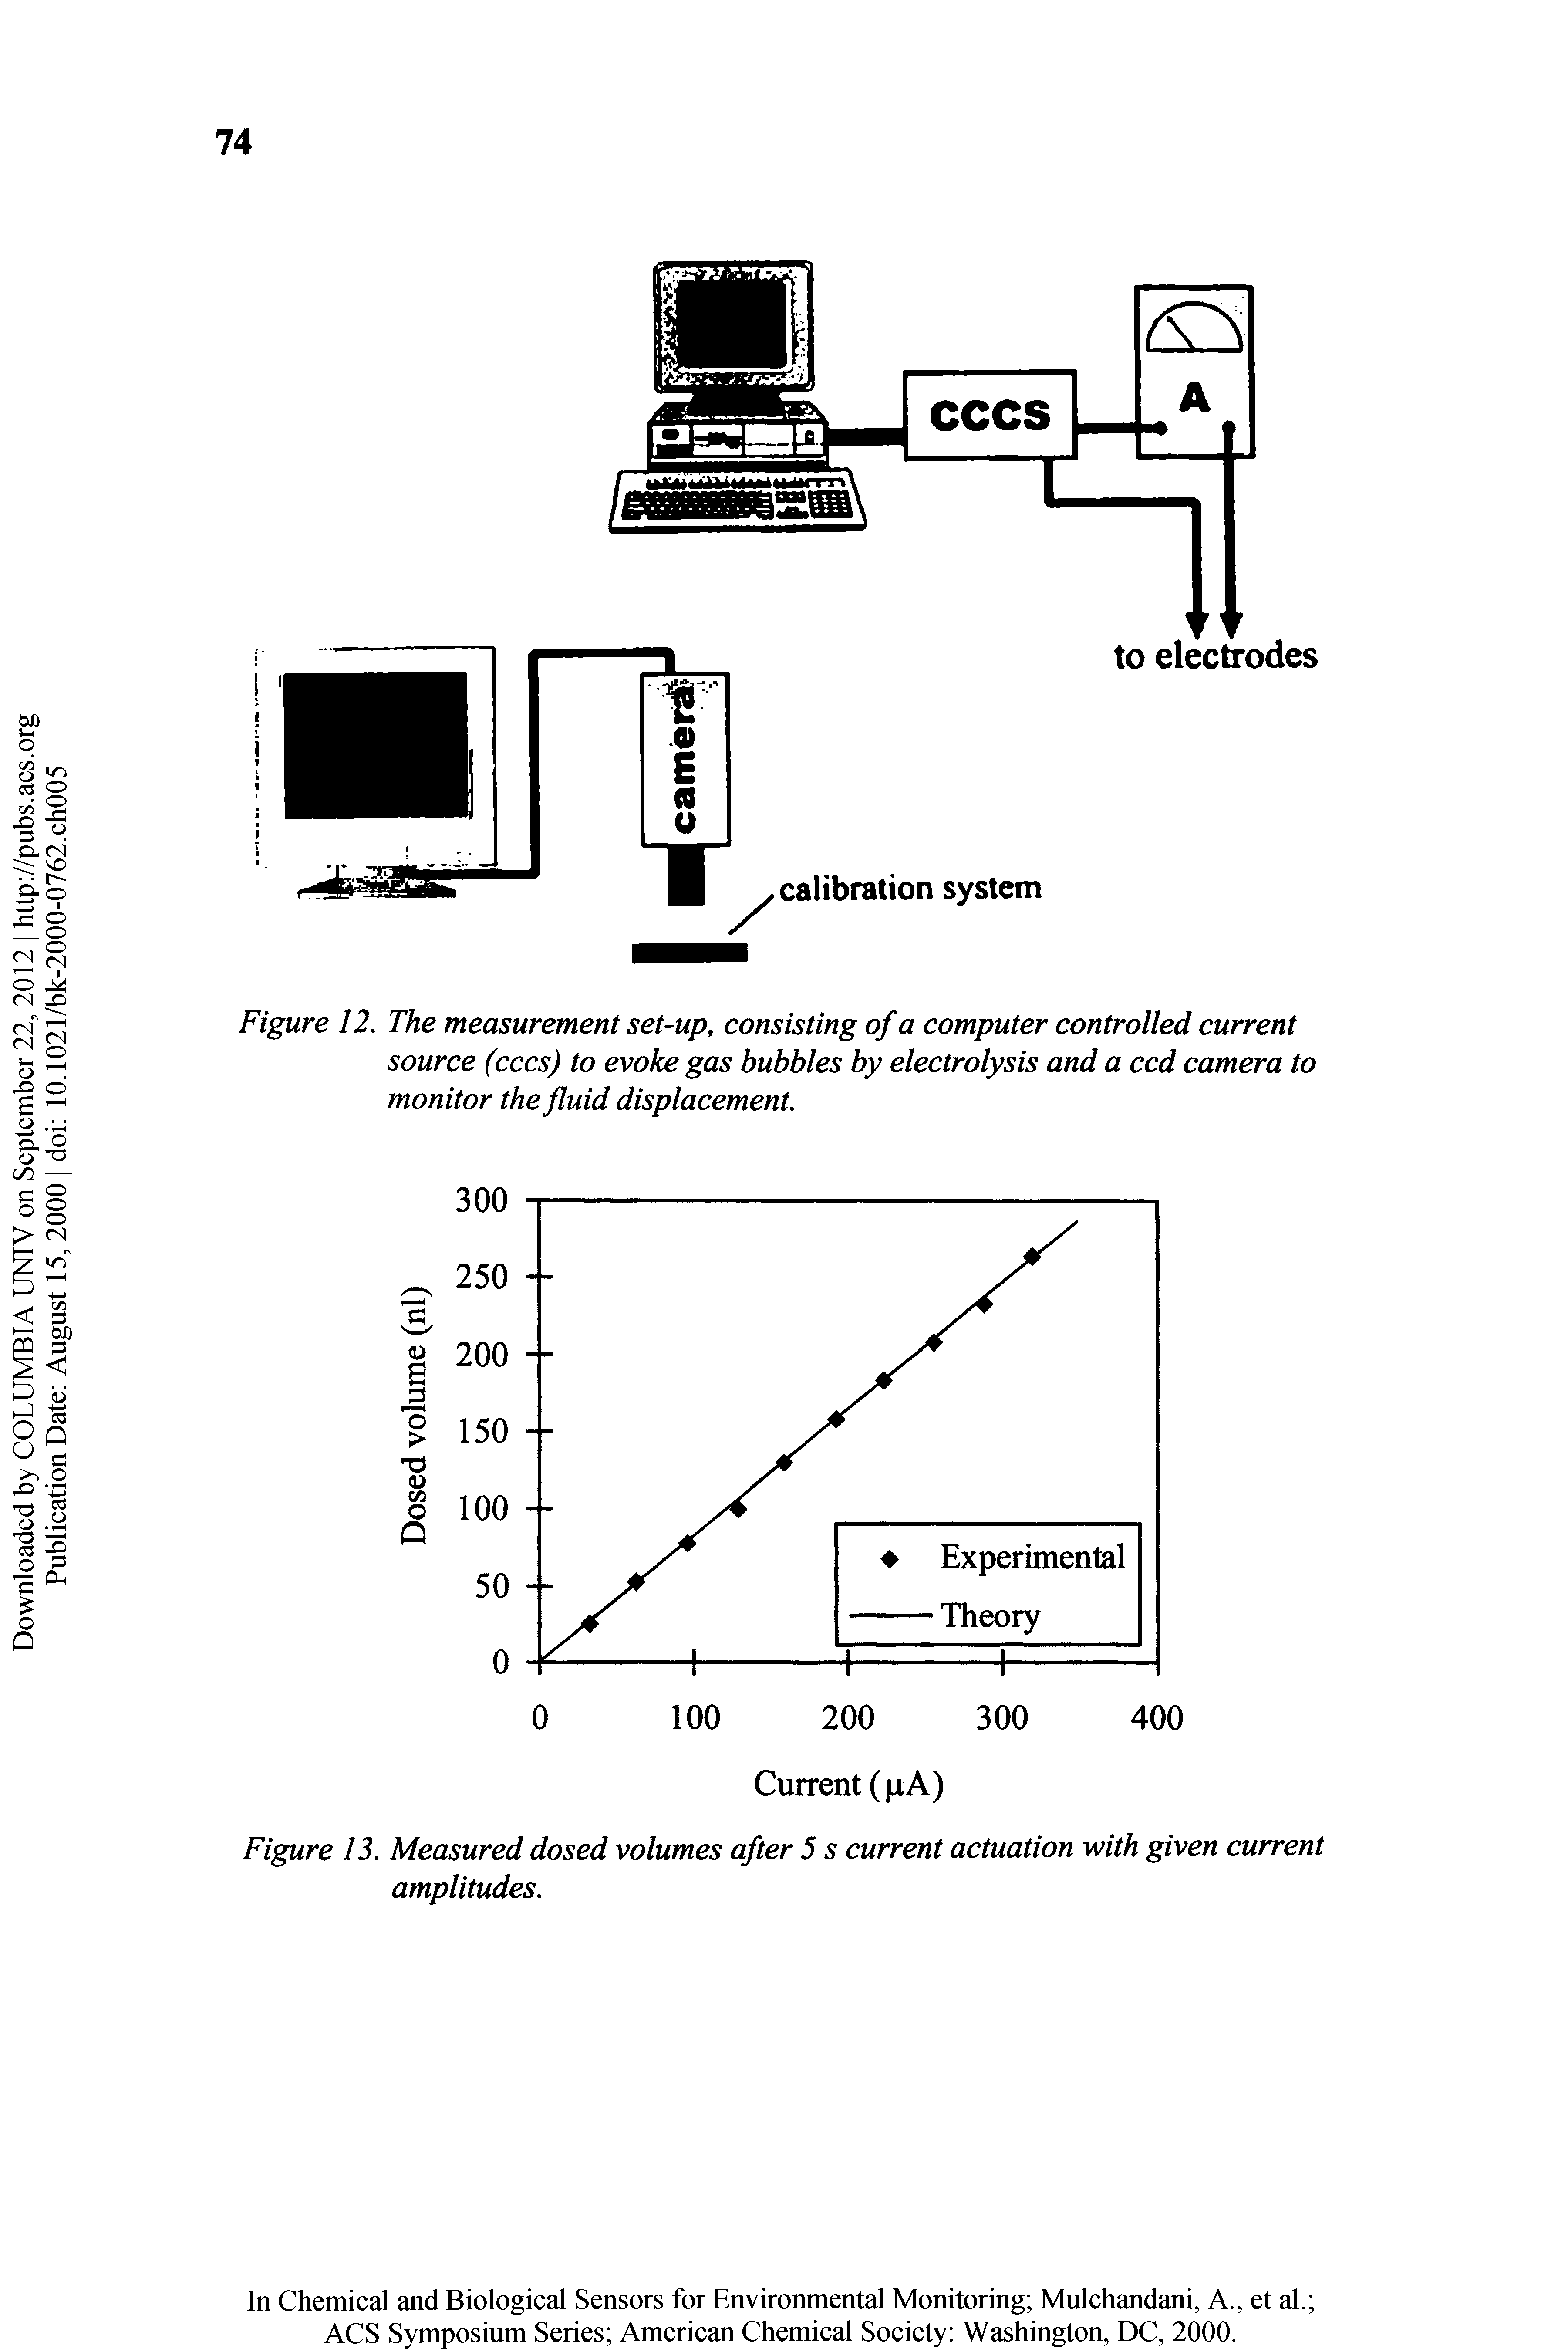 Figure 12. The measurement set-up, consisting of a computer controlled current source (cccs) to evoke gas bubbles by electrolysis and a ccd camera to monitor the fluid displacement.